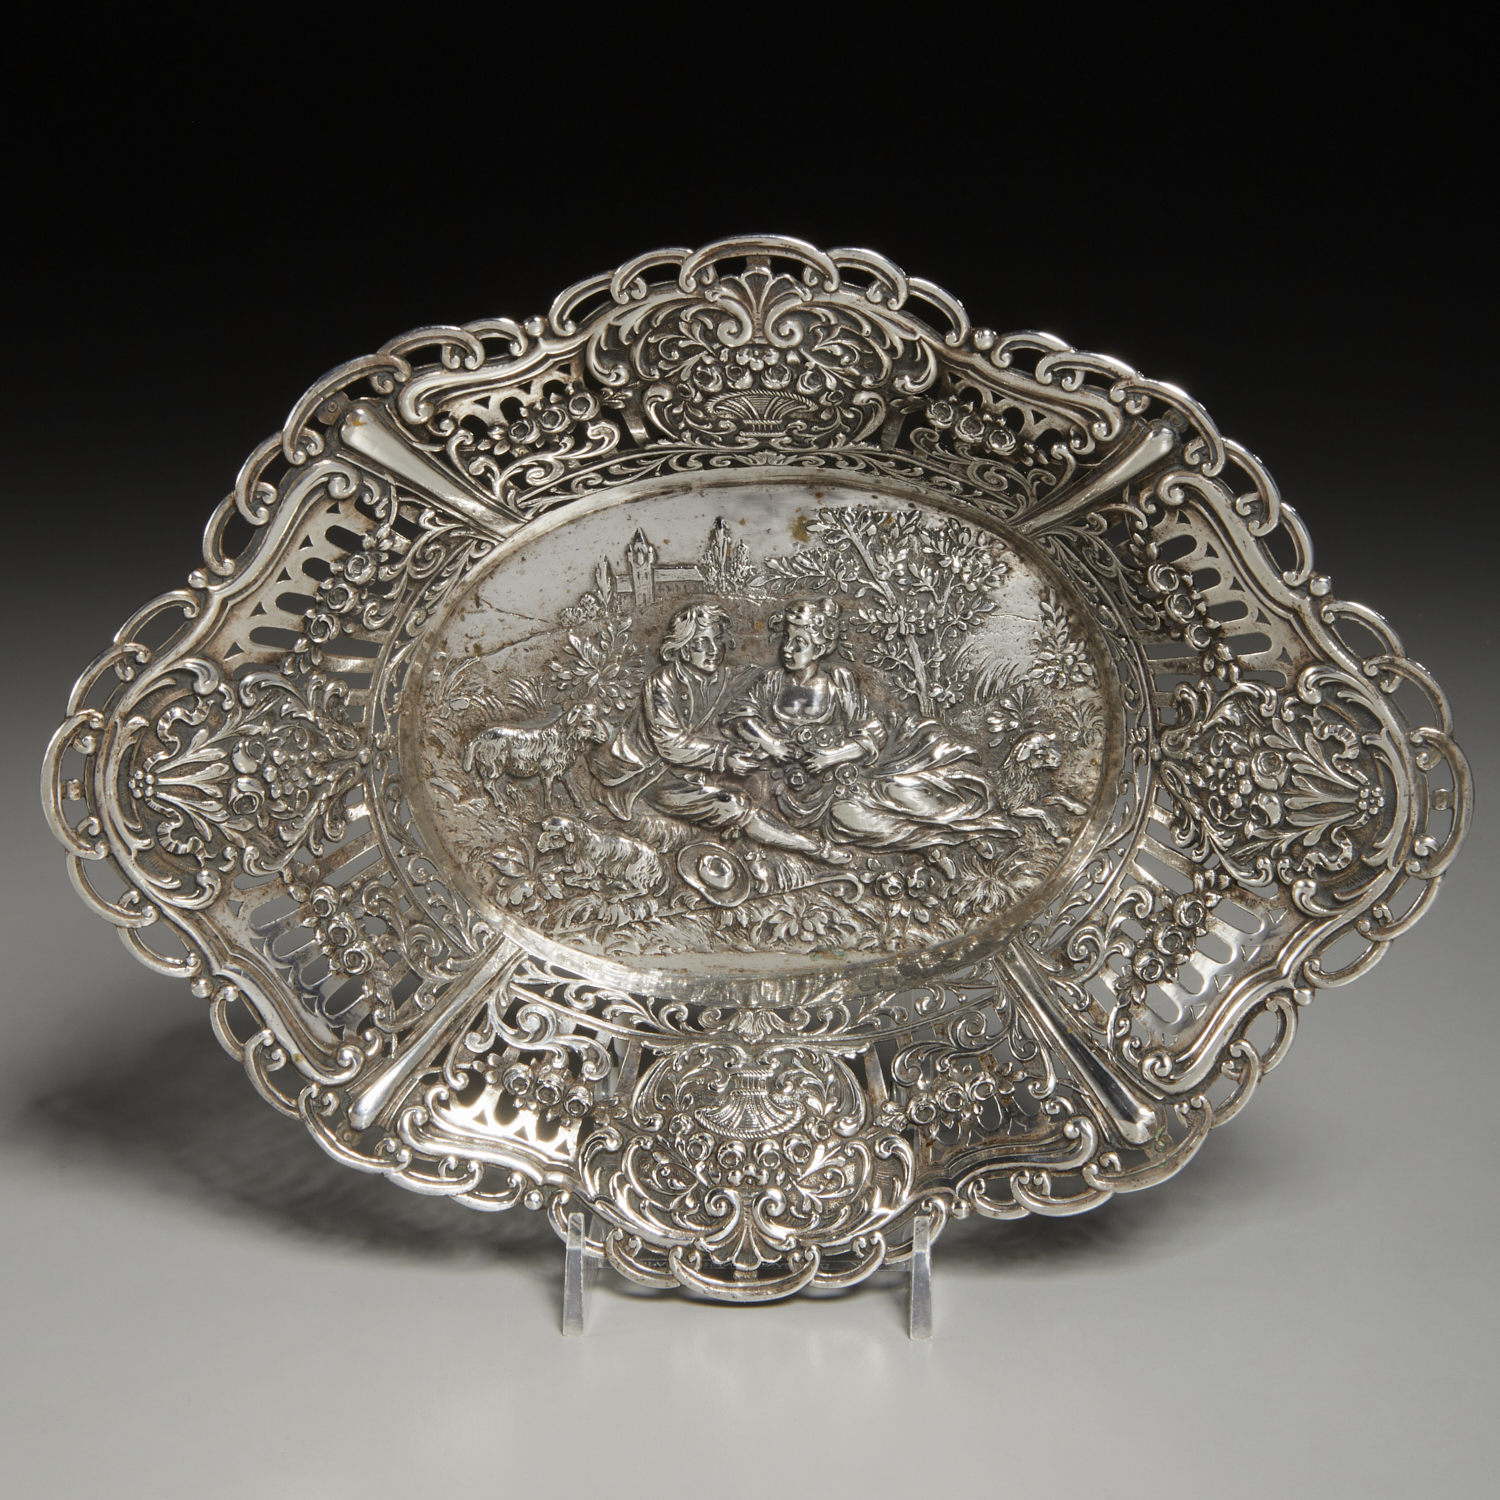 GERMAN .800 SILVER REPOUSSE RETICULATED